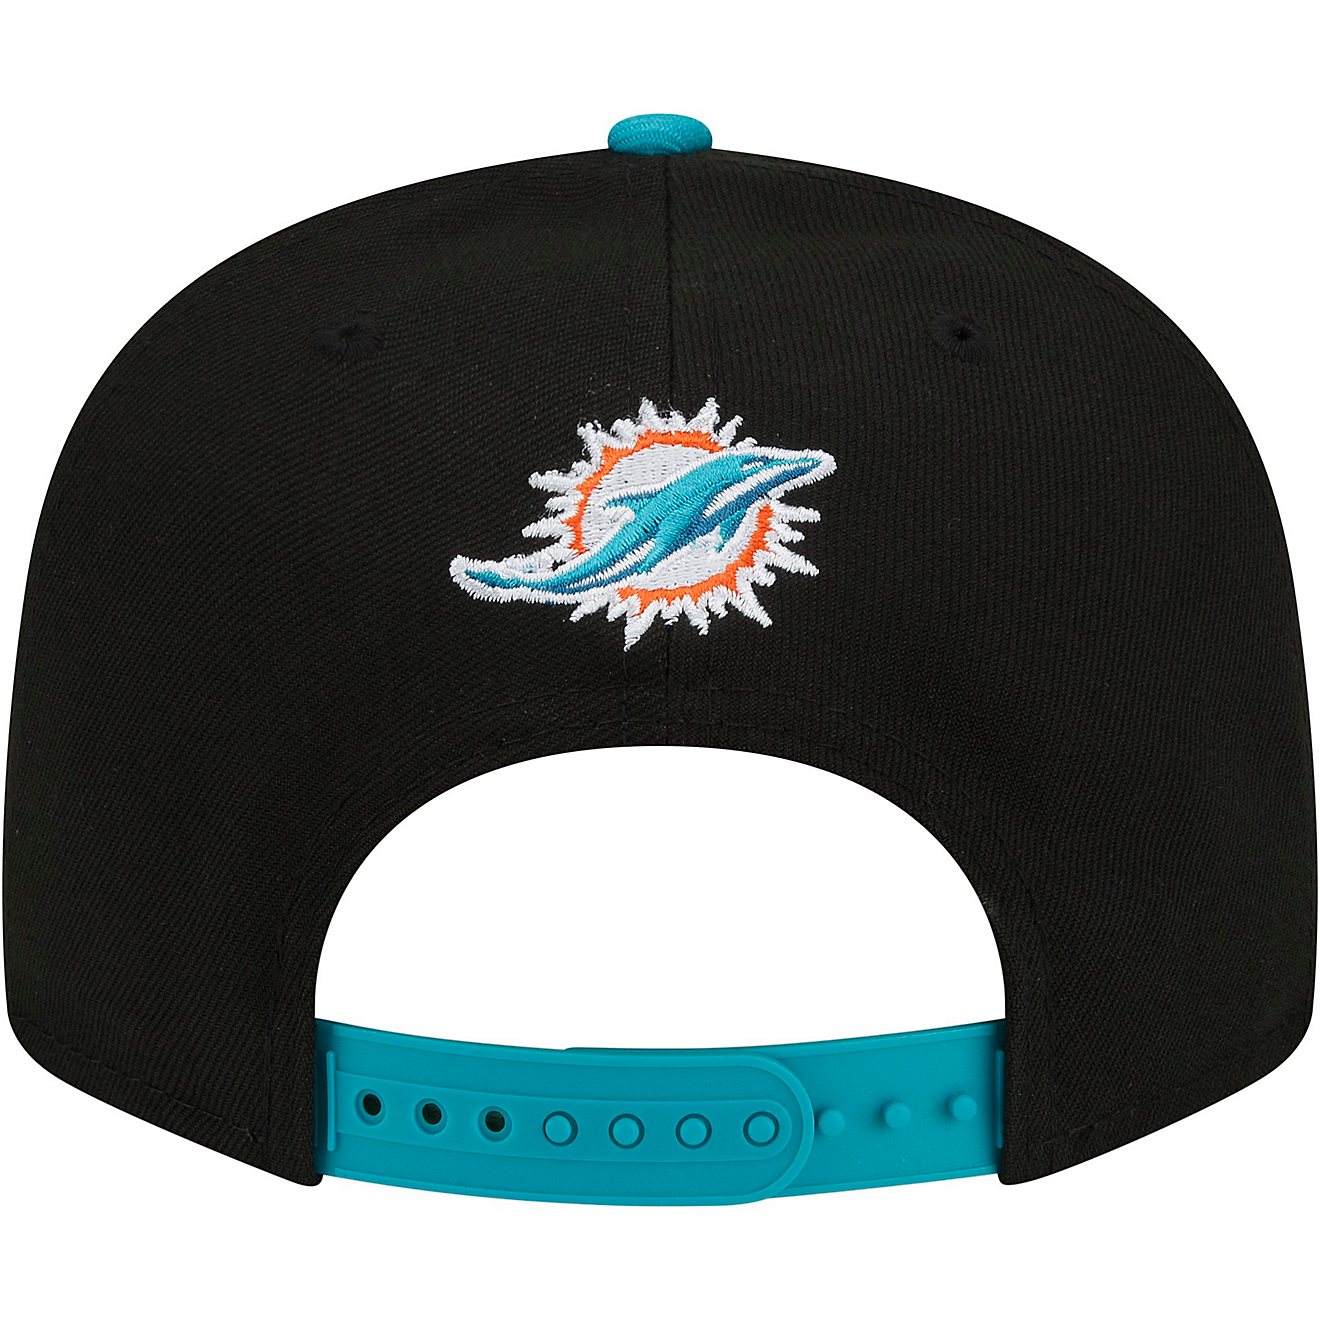 New Era Men's Miami Dolphins NFL Draft 22 9FIFTY Cap                                                                             - view number 4